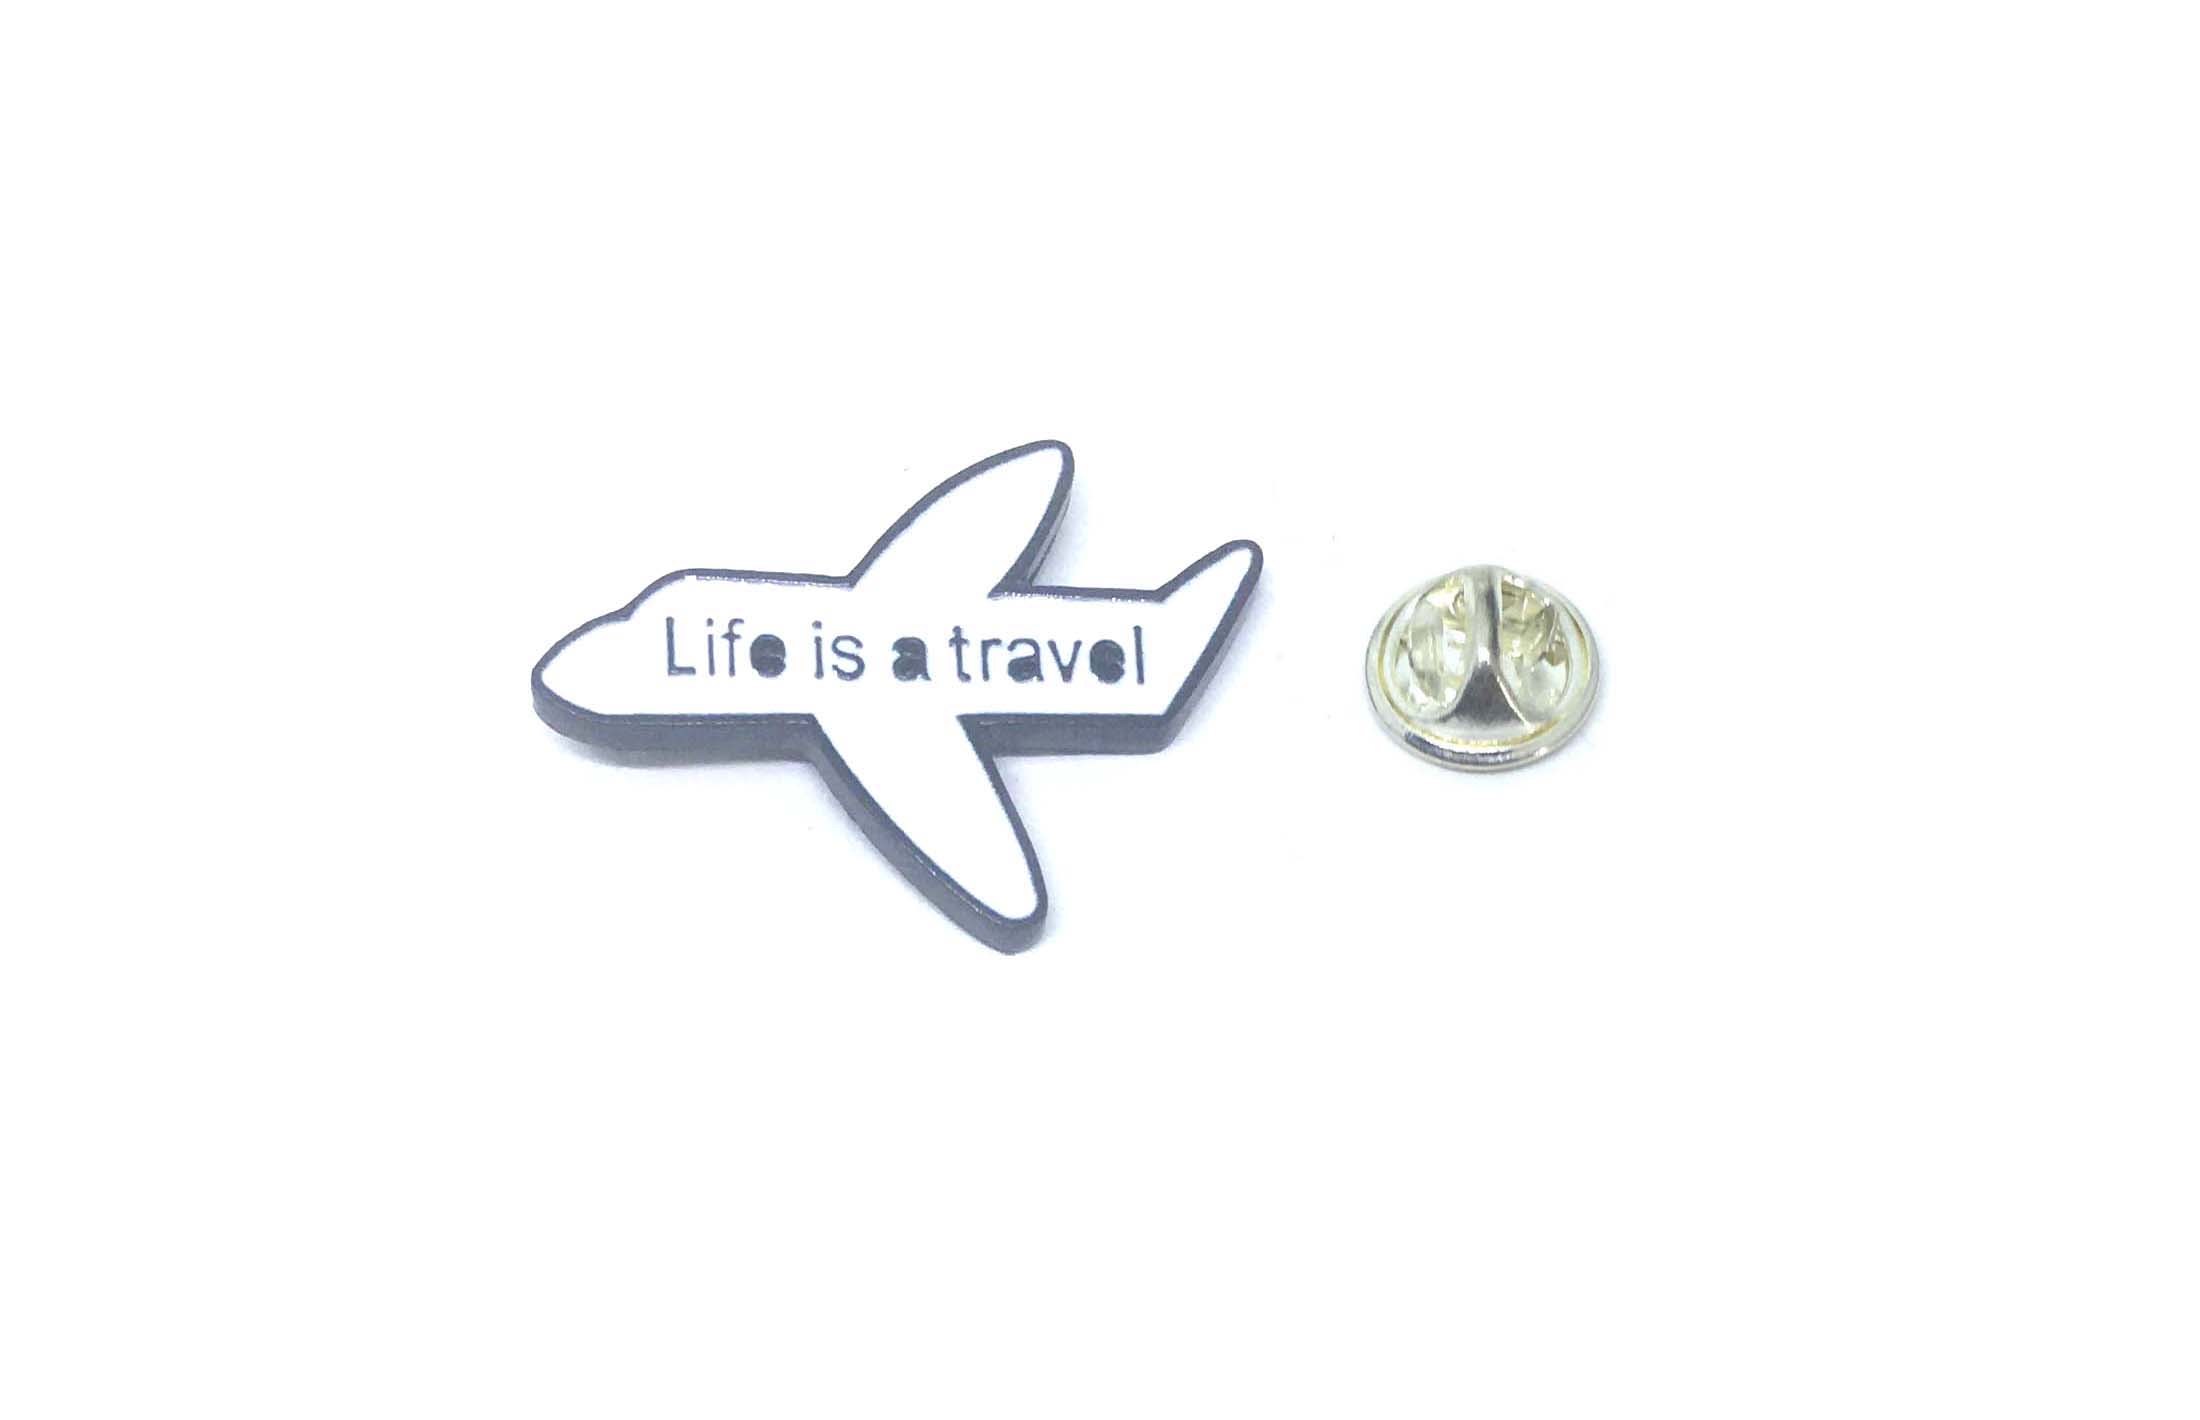 "Life is a travel" Airplane Pin